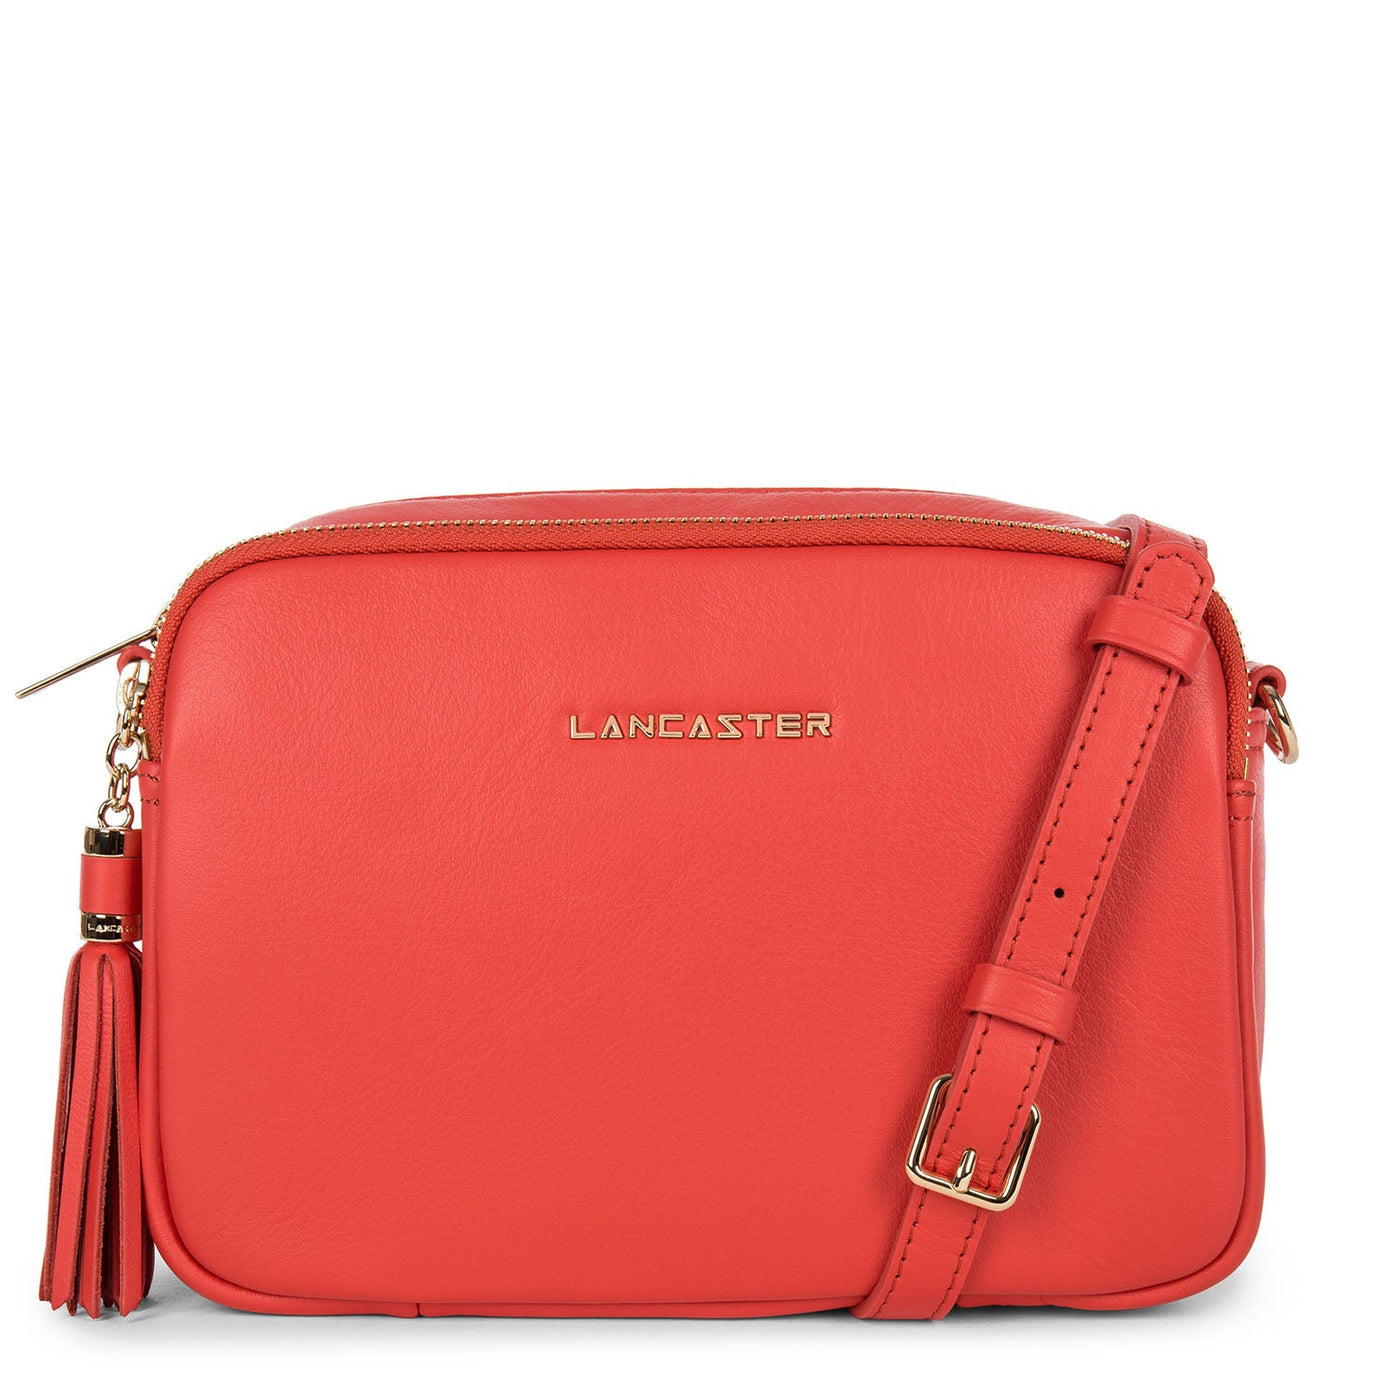 m crossbody bag - mademoiselle ana #couleur_pasteque